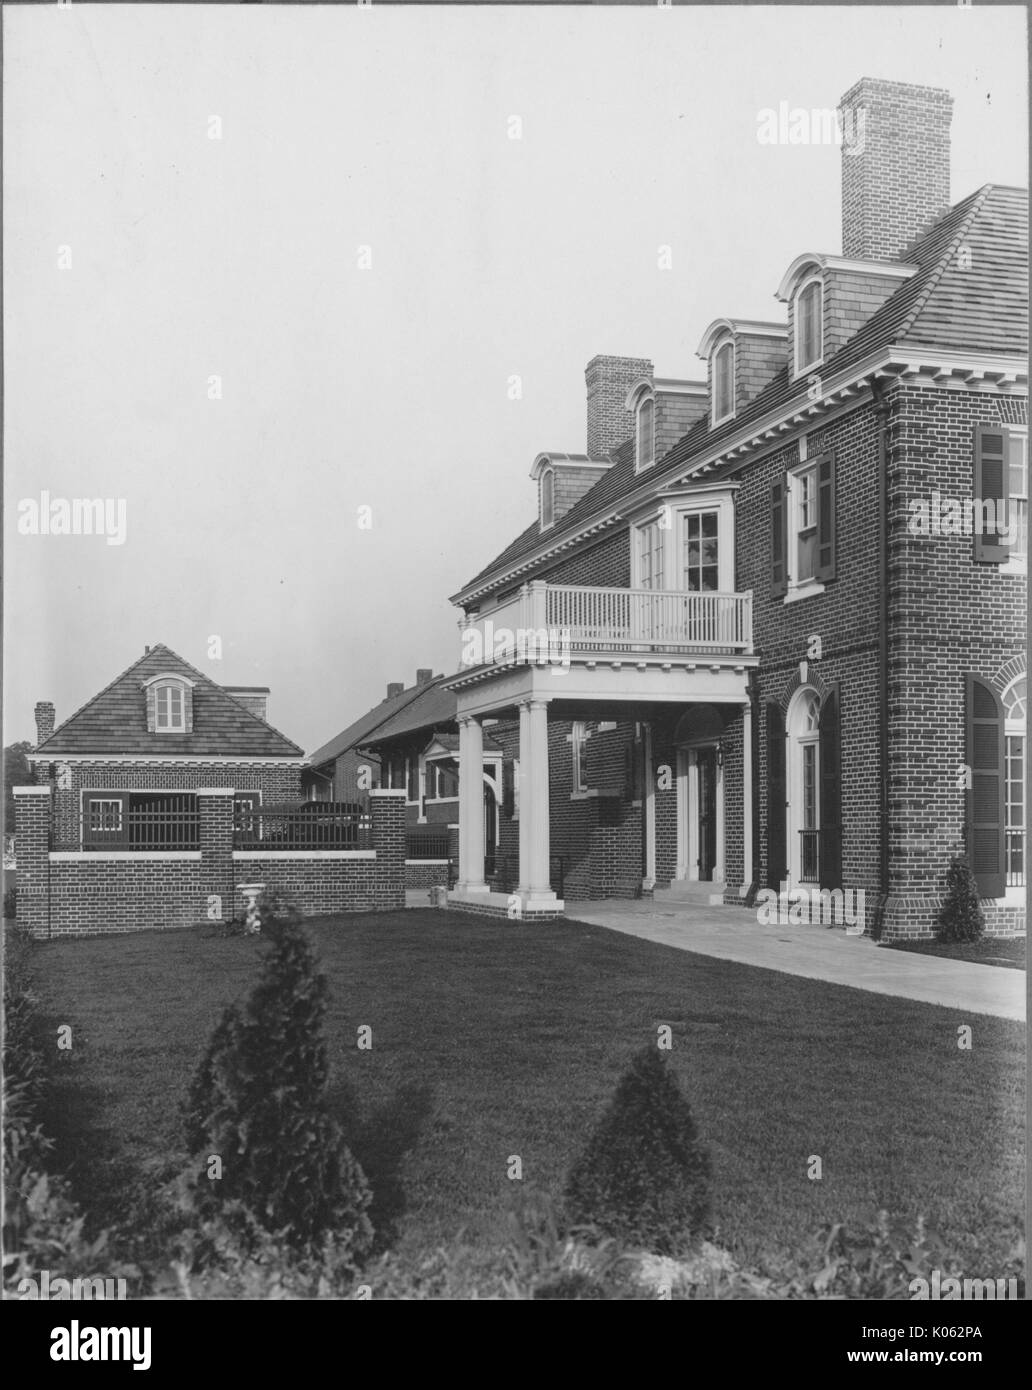 Side view of a two-story single-family home near Roland Park and Guilford, the home is made of brick and has dark-colored window shutters, the front door has a structure above it held up with two light-colored columns, above the columns is a porch to the second-story, the garage is a separate structure, United States, 1910. This image is from a series documenting the construction and sale of homes in the Roland Park/Guilford neighborhood of Baltimore, a streetcar suburb and one of the first planned communities in the United States. Stock Photo